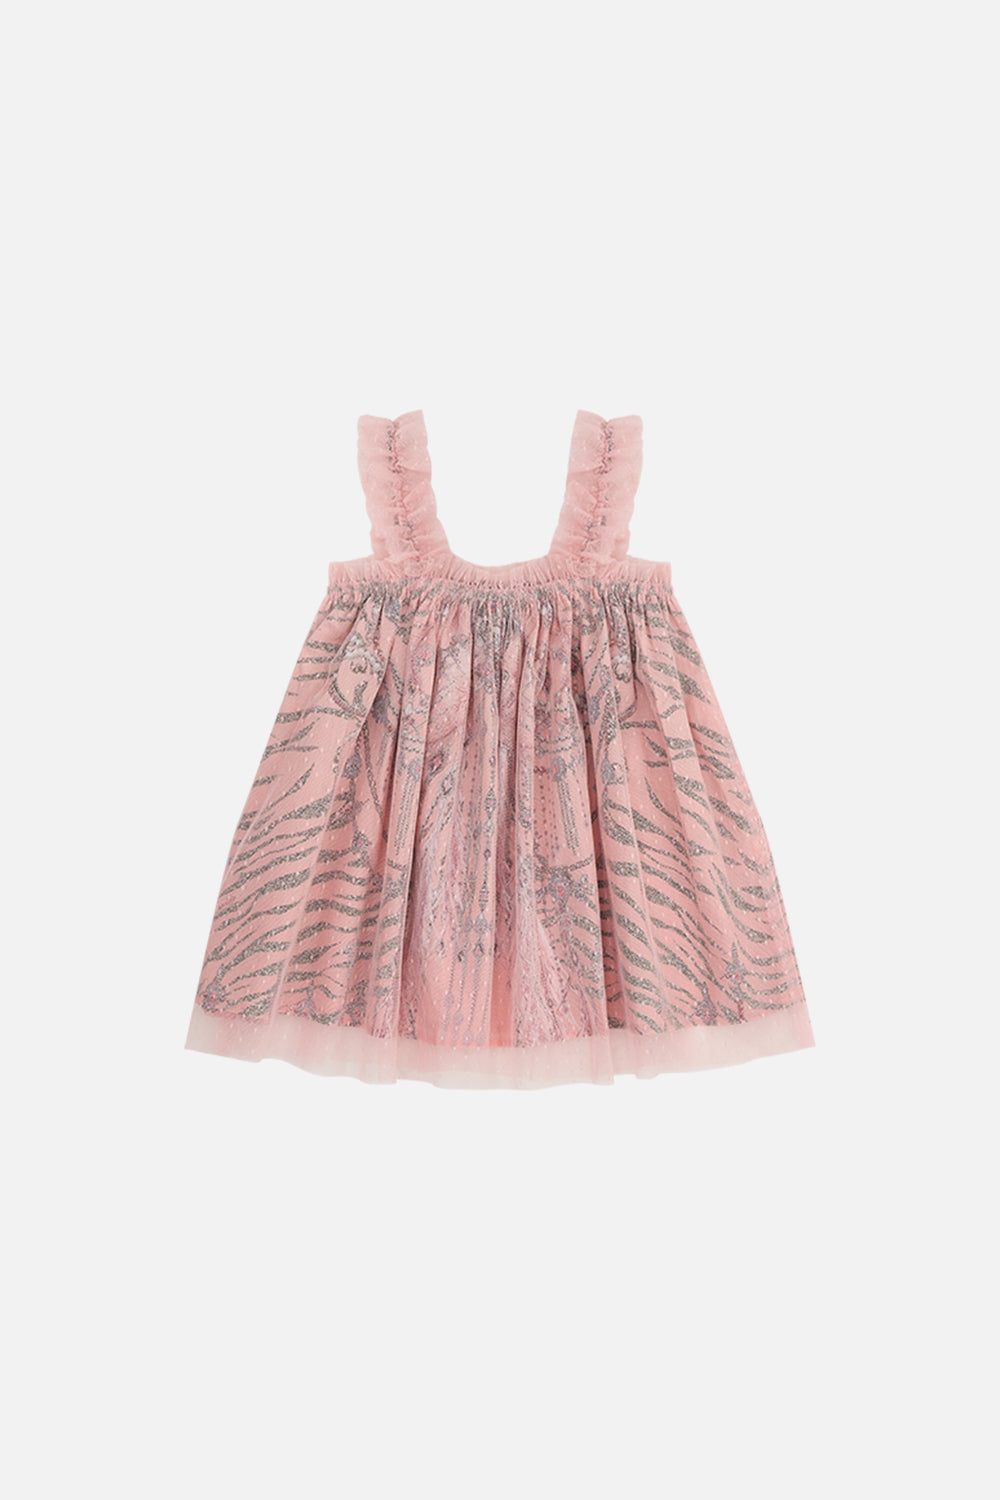 BABIES RUFFLE TENT DRESS WITH TULLE LAYER STARSHIP SISTAS